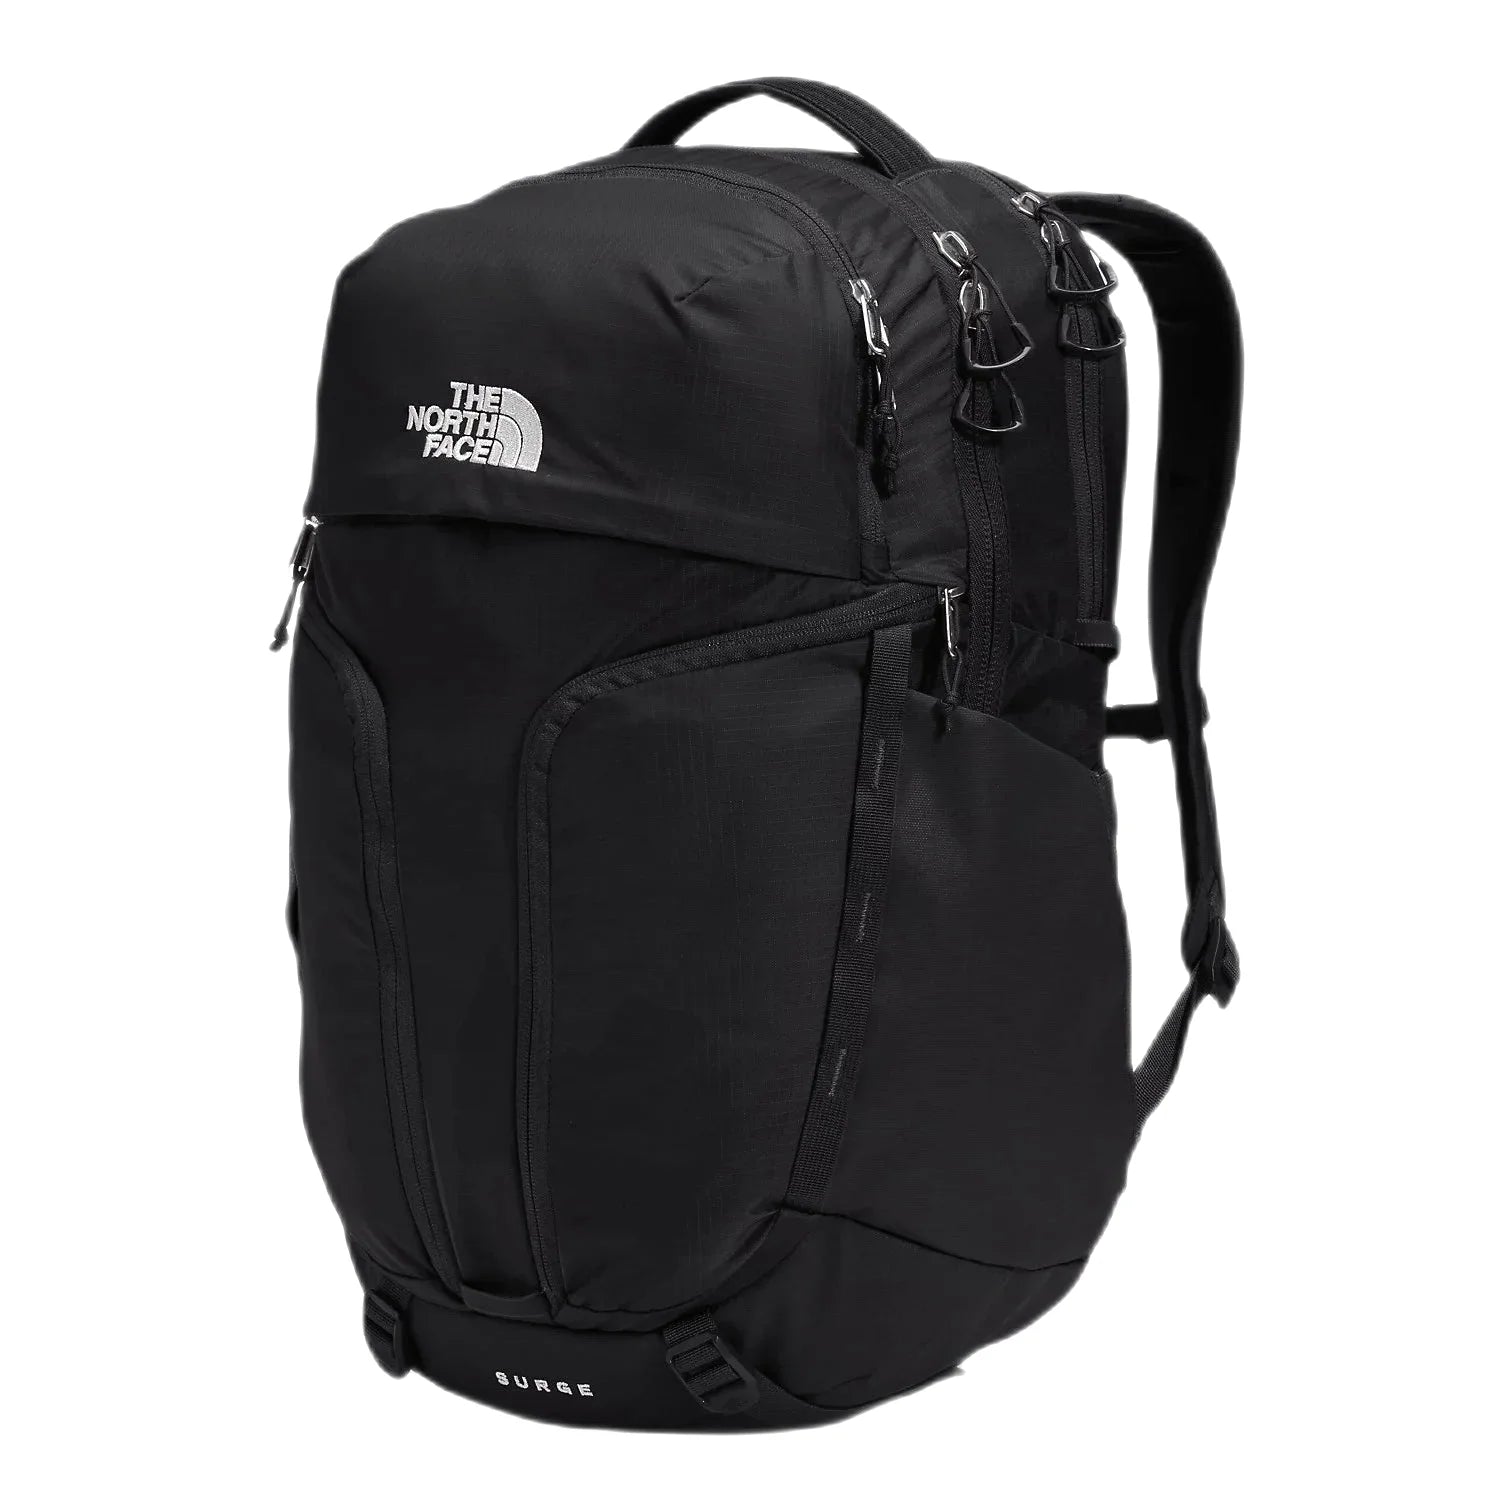 The North Face Women's Surge Backpack TNF Black/Black Front Side